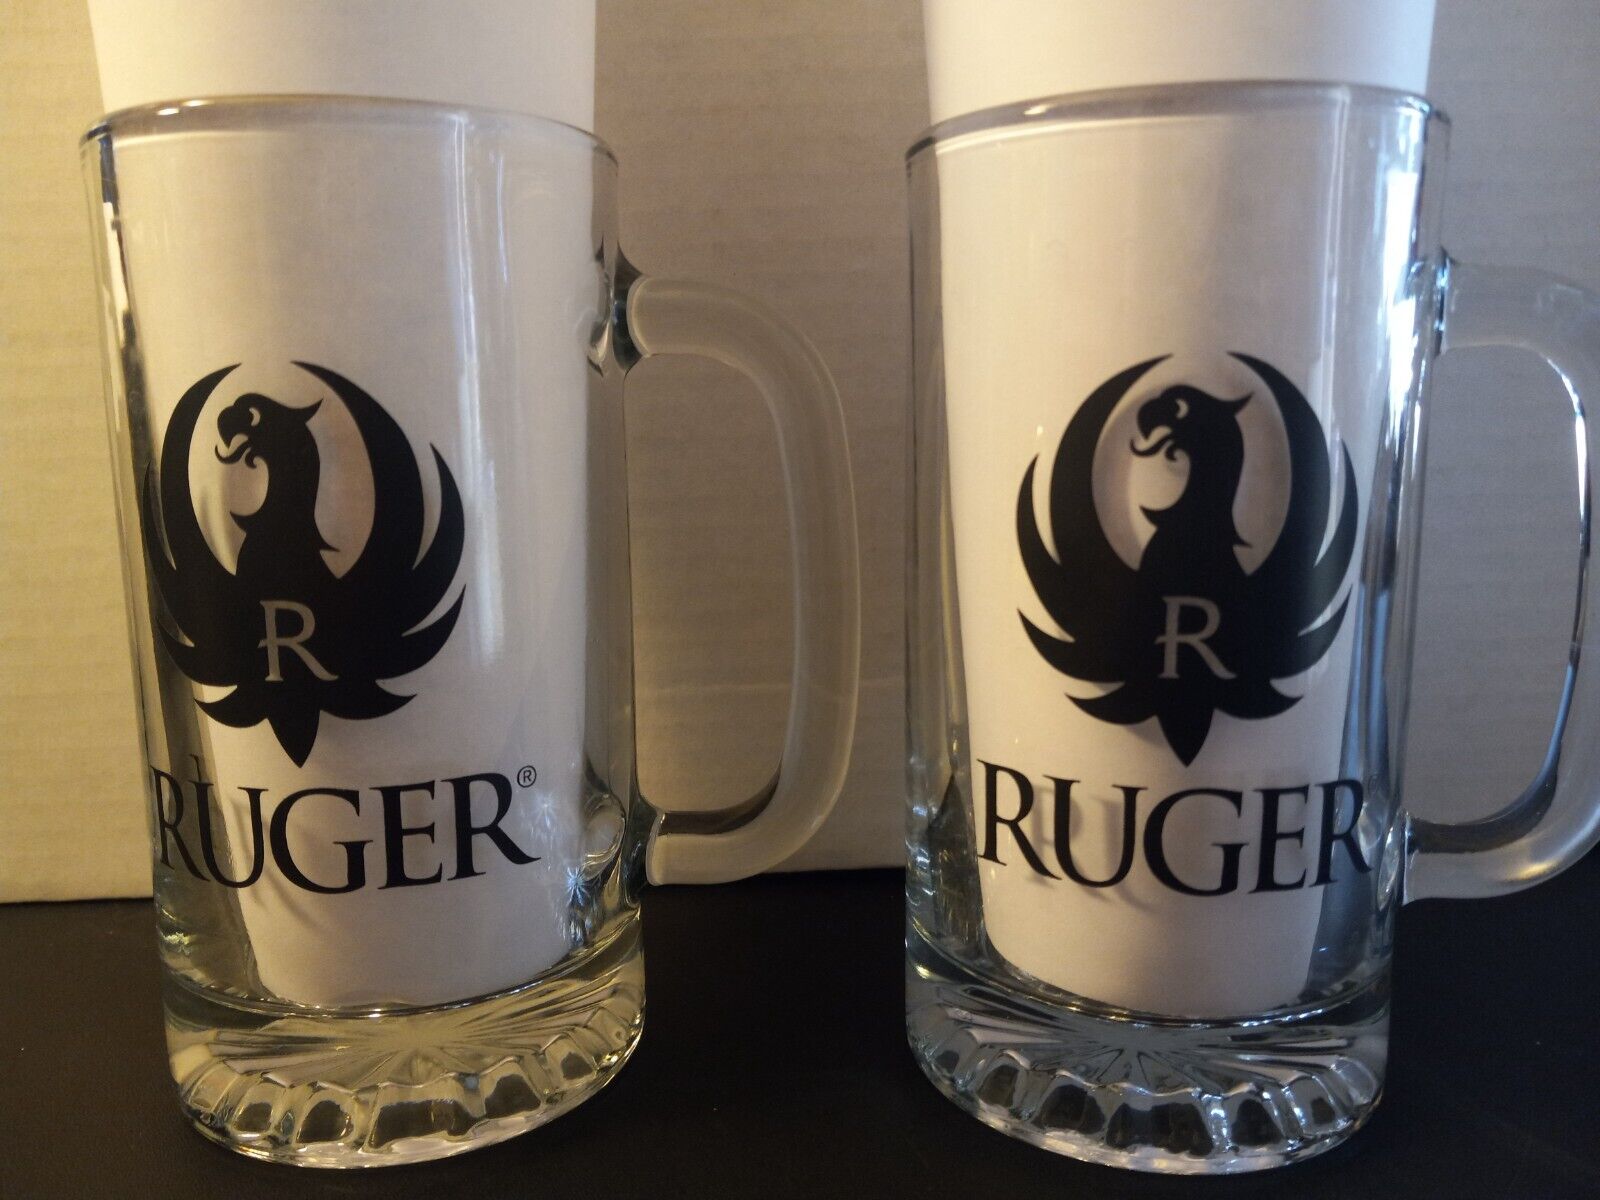 Ruger Firearms Clear Glass Stein Beer Mug set of 2 Man Cave